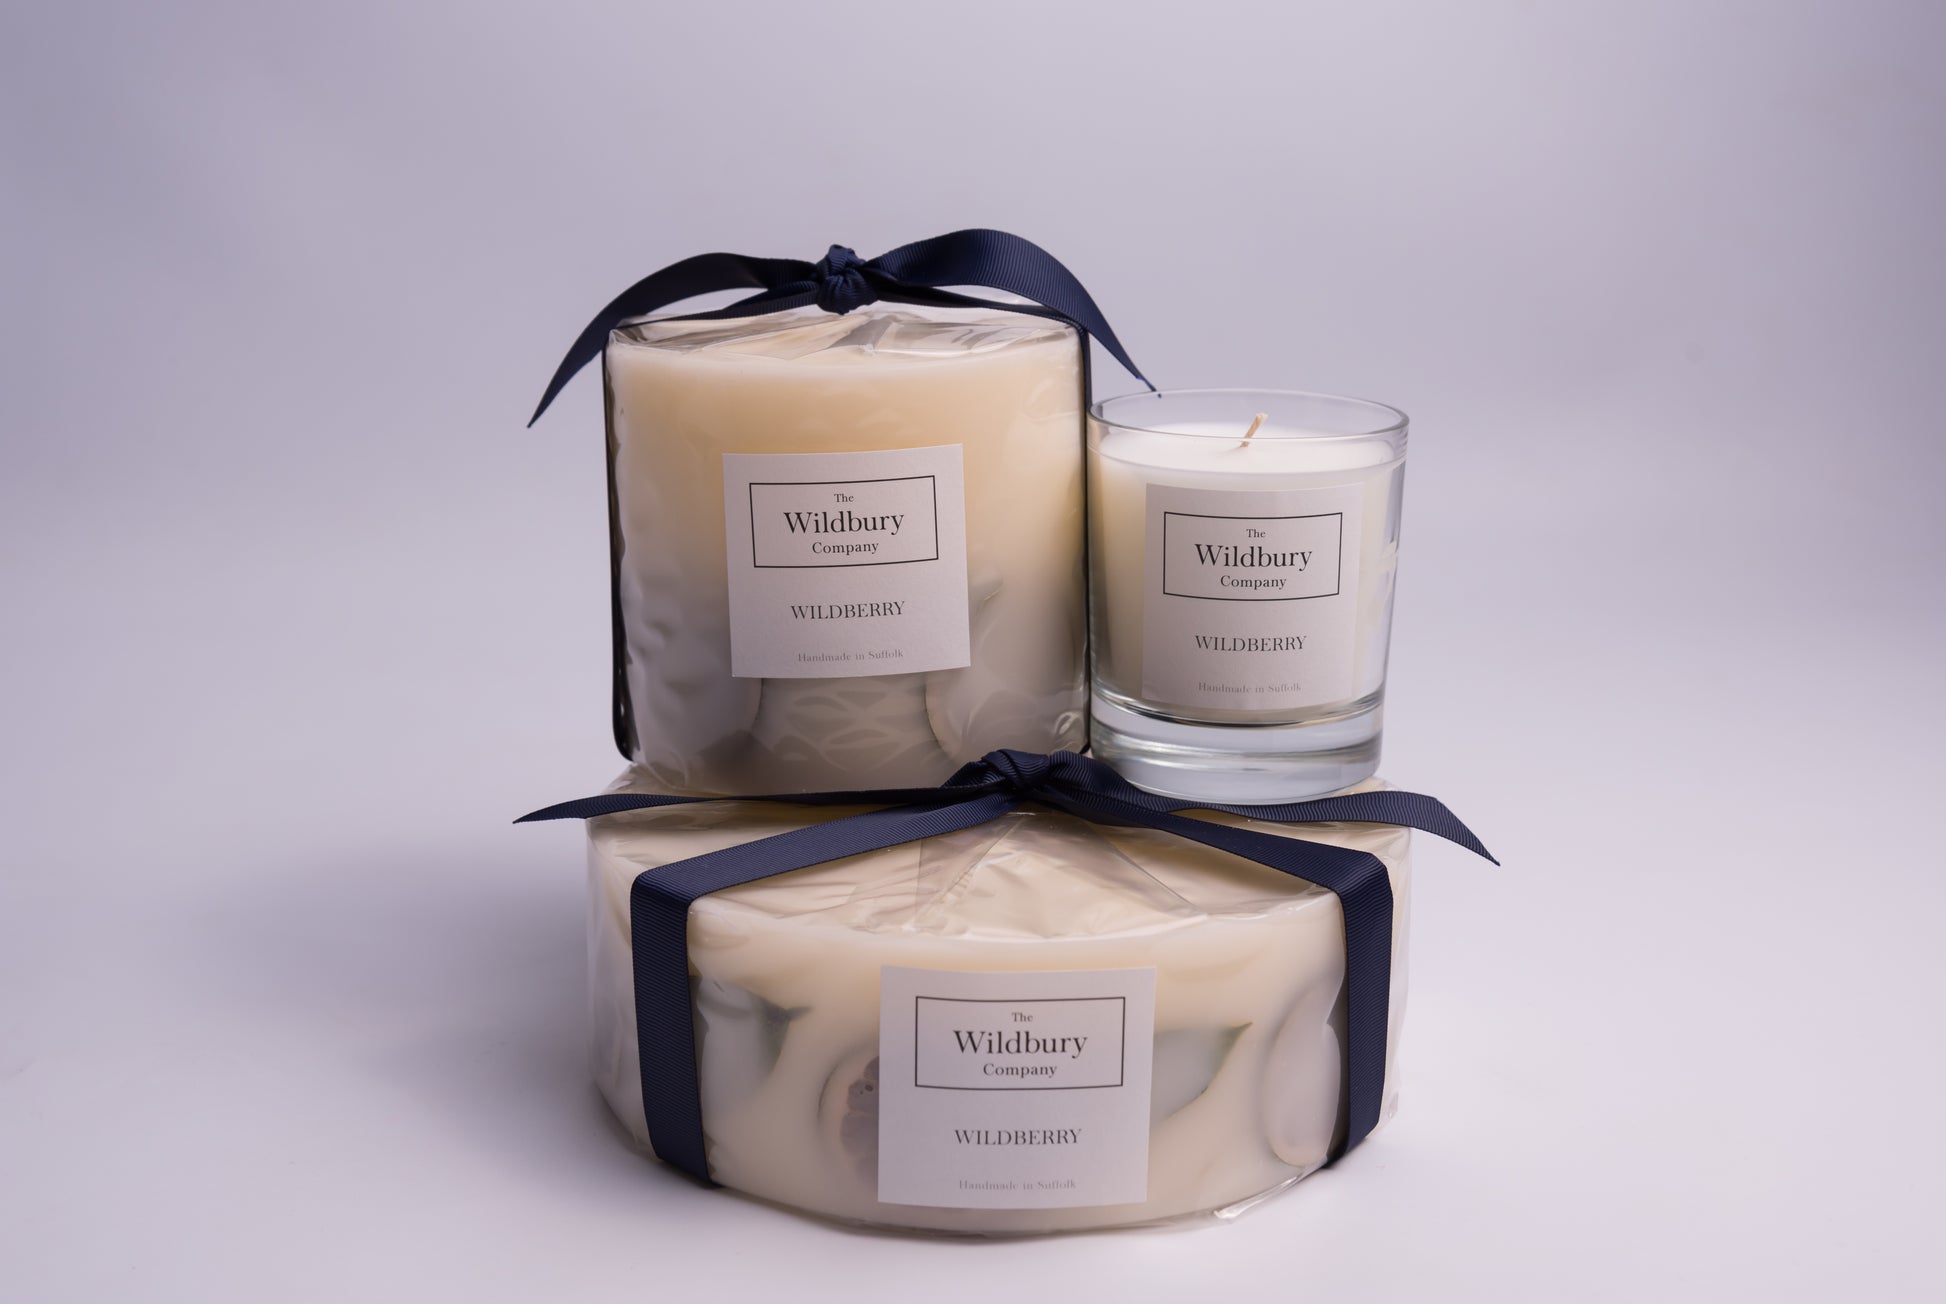 Group of three Wildberry Fragranced Candles displaying Signature, Large and Extra Large sizes